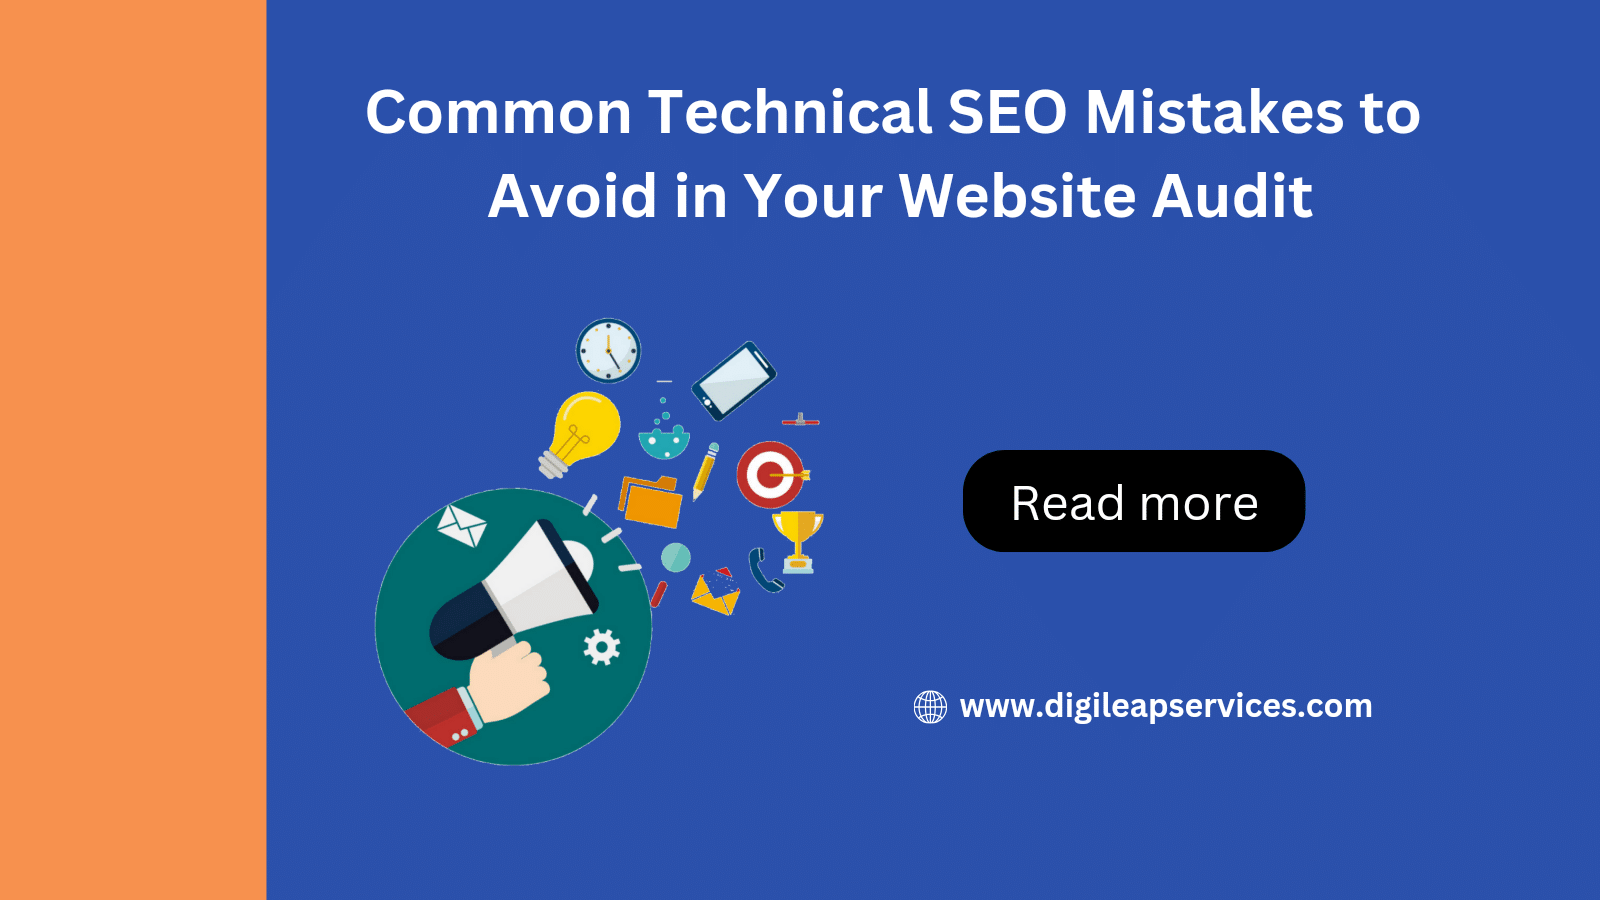 Common Technical SEO Mistakes to Avoid in Your Website Audit